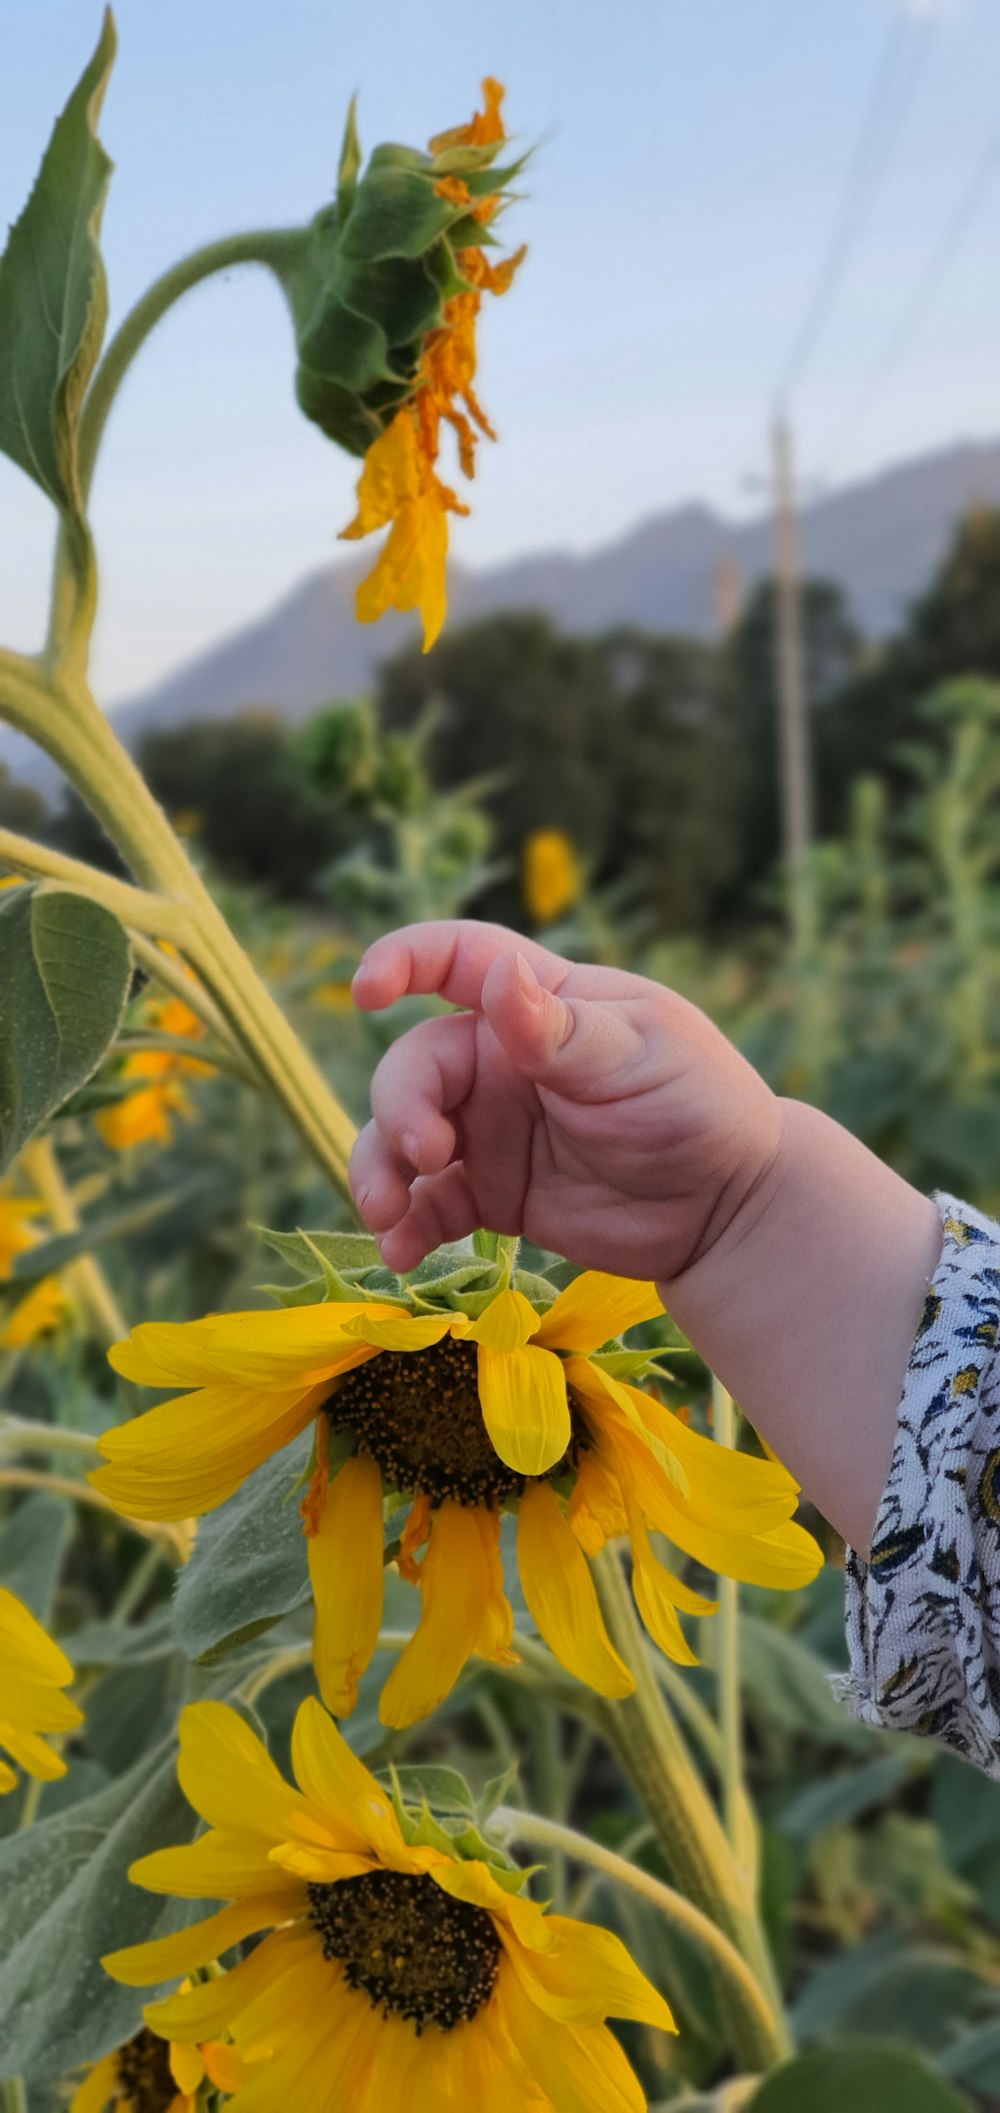 person holding sunflower during daytime